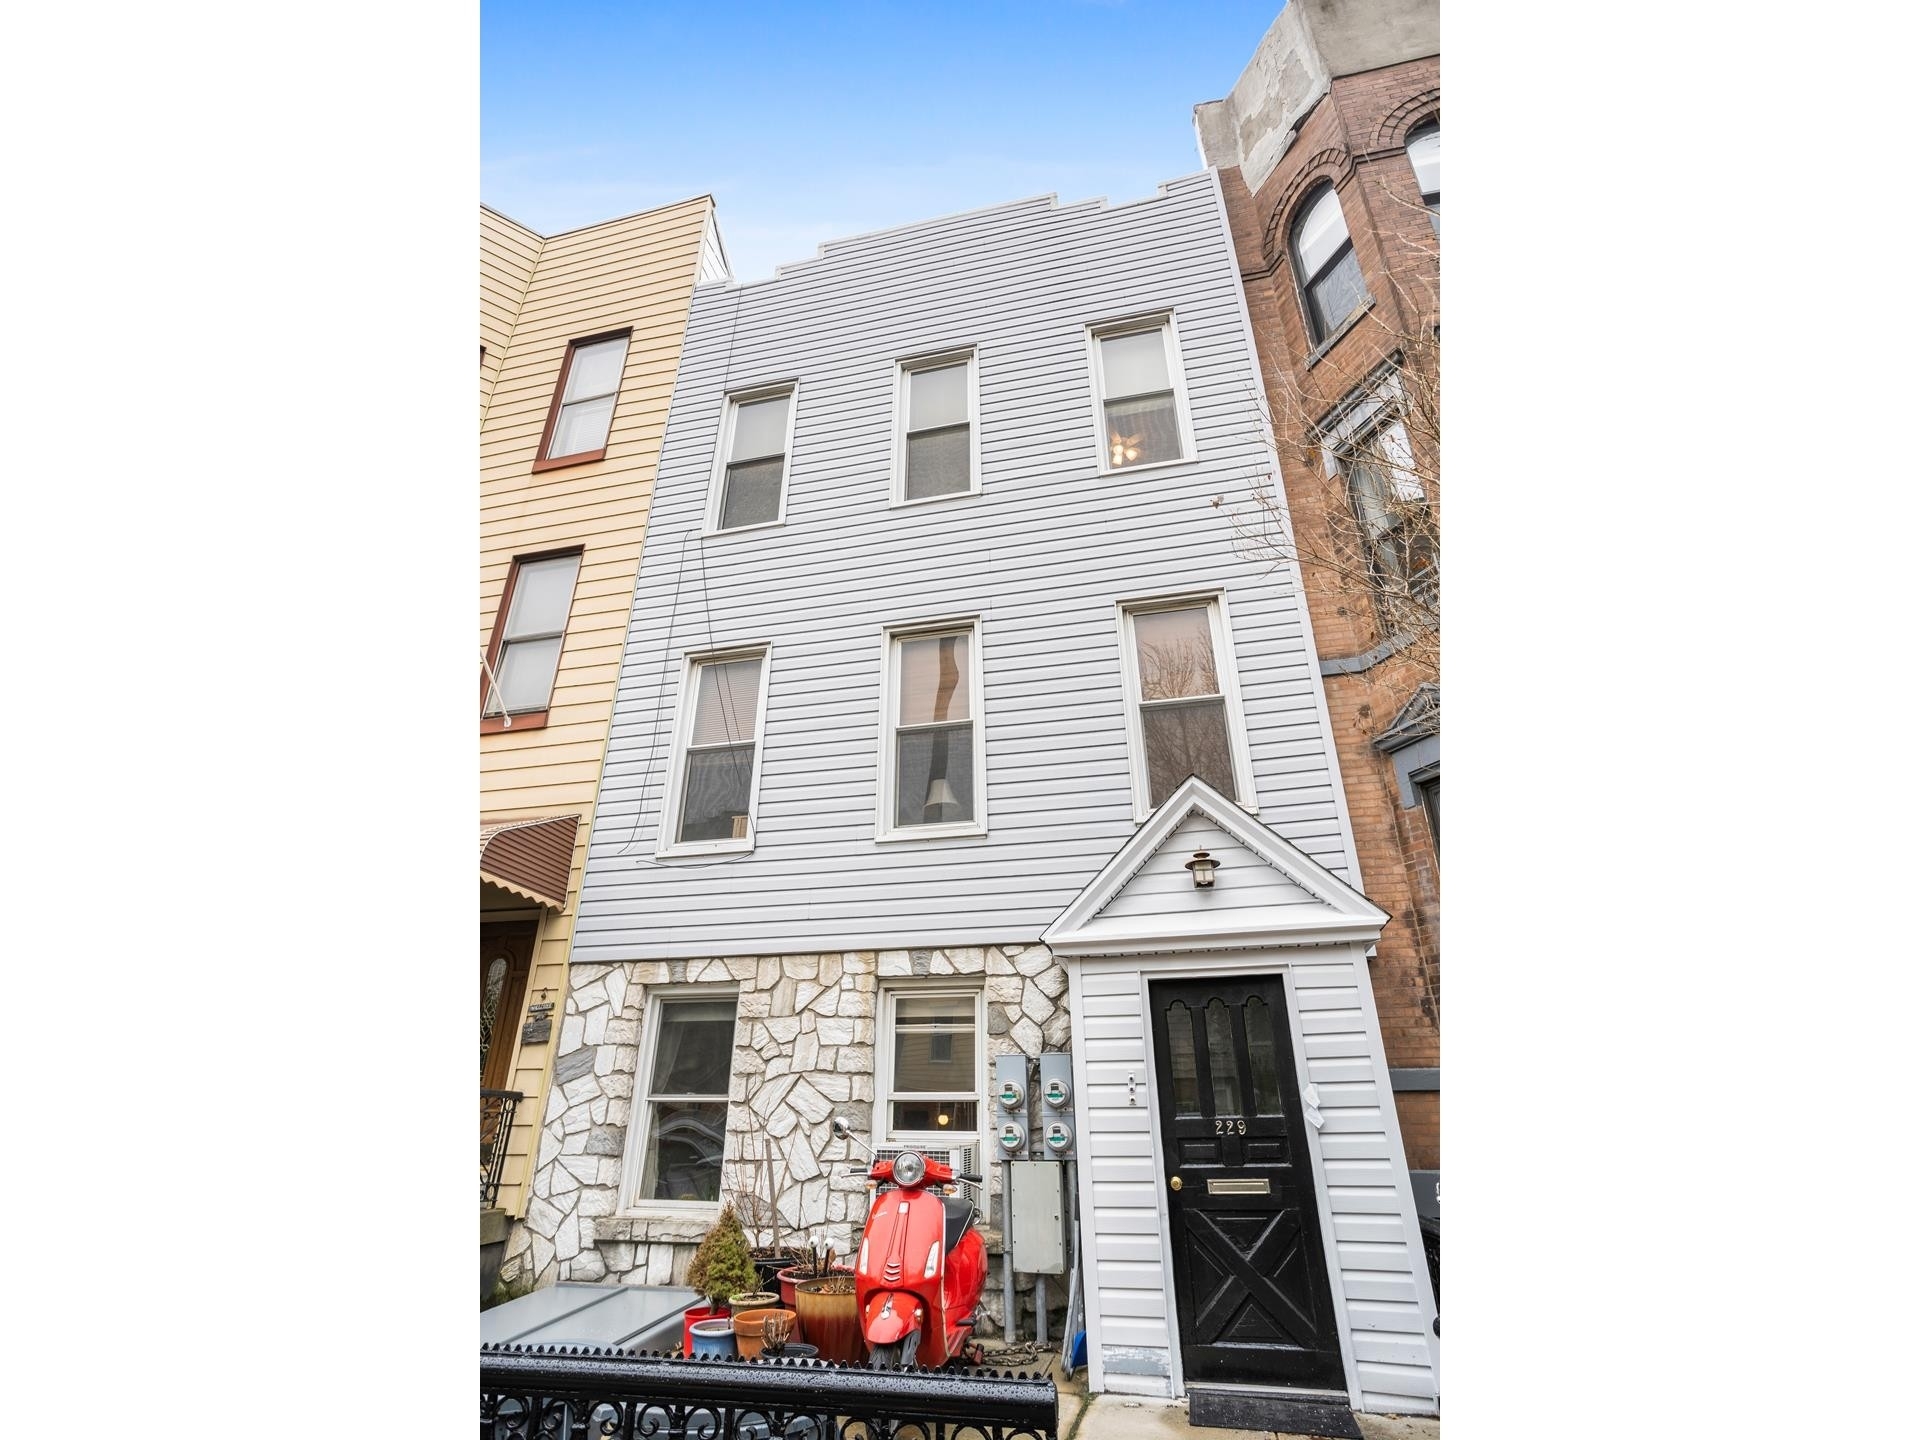 Multi Family Townhouse for Sale at 229 N HENRY ST, TOWNHOUSE Greenpoint, Brooklyn, NY 11222